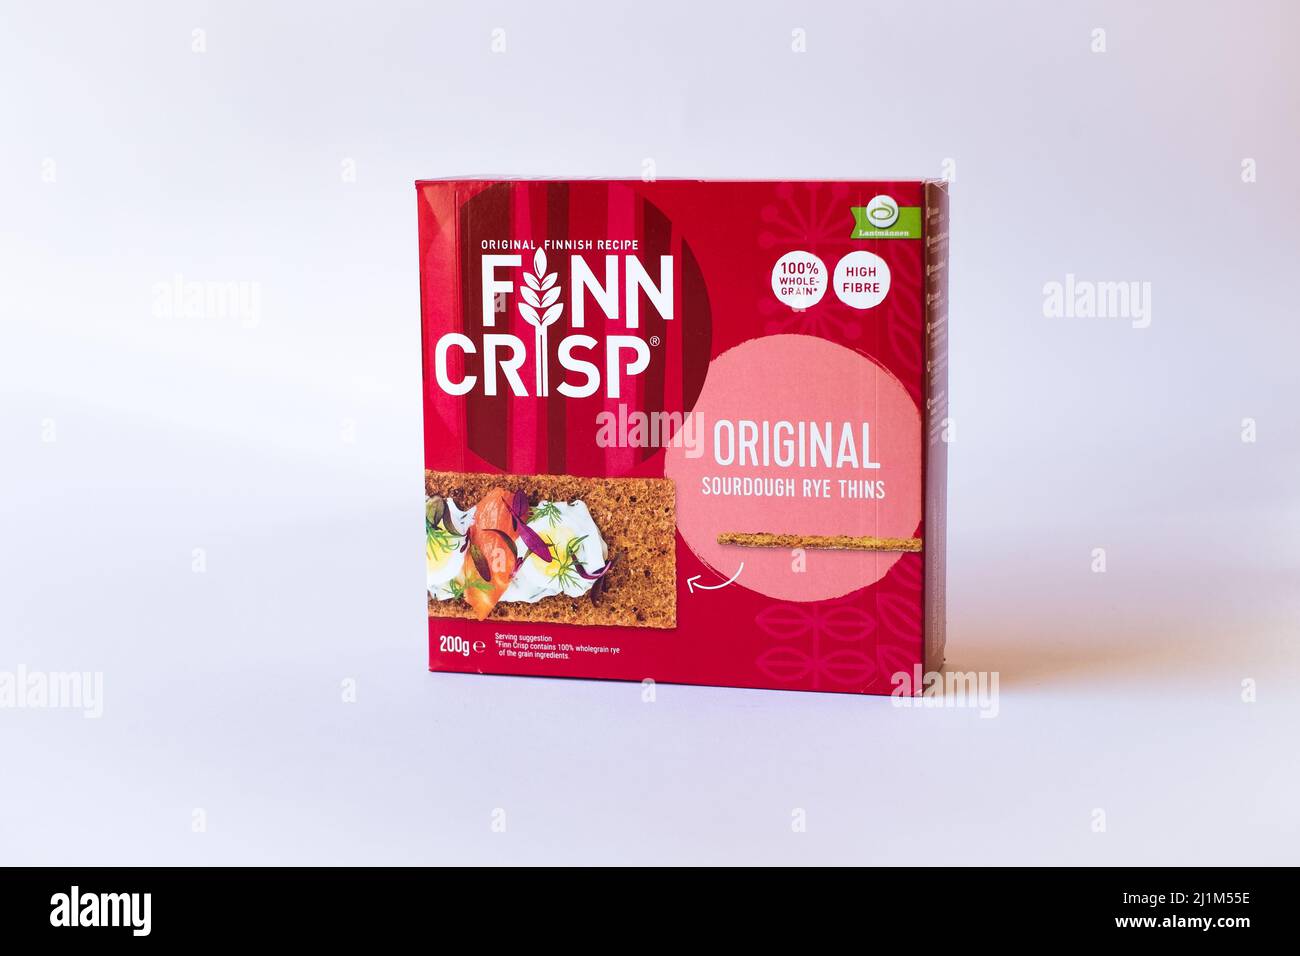 Finn Crisp Original Sourdough Rye Thins from Finland. Selective focus on company name. Stock Photo